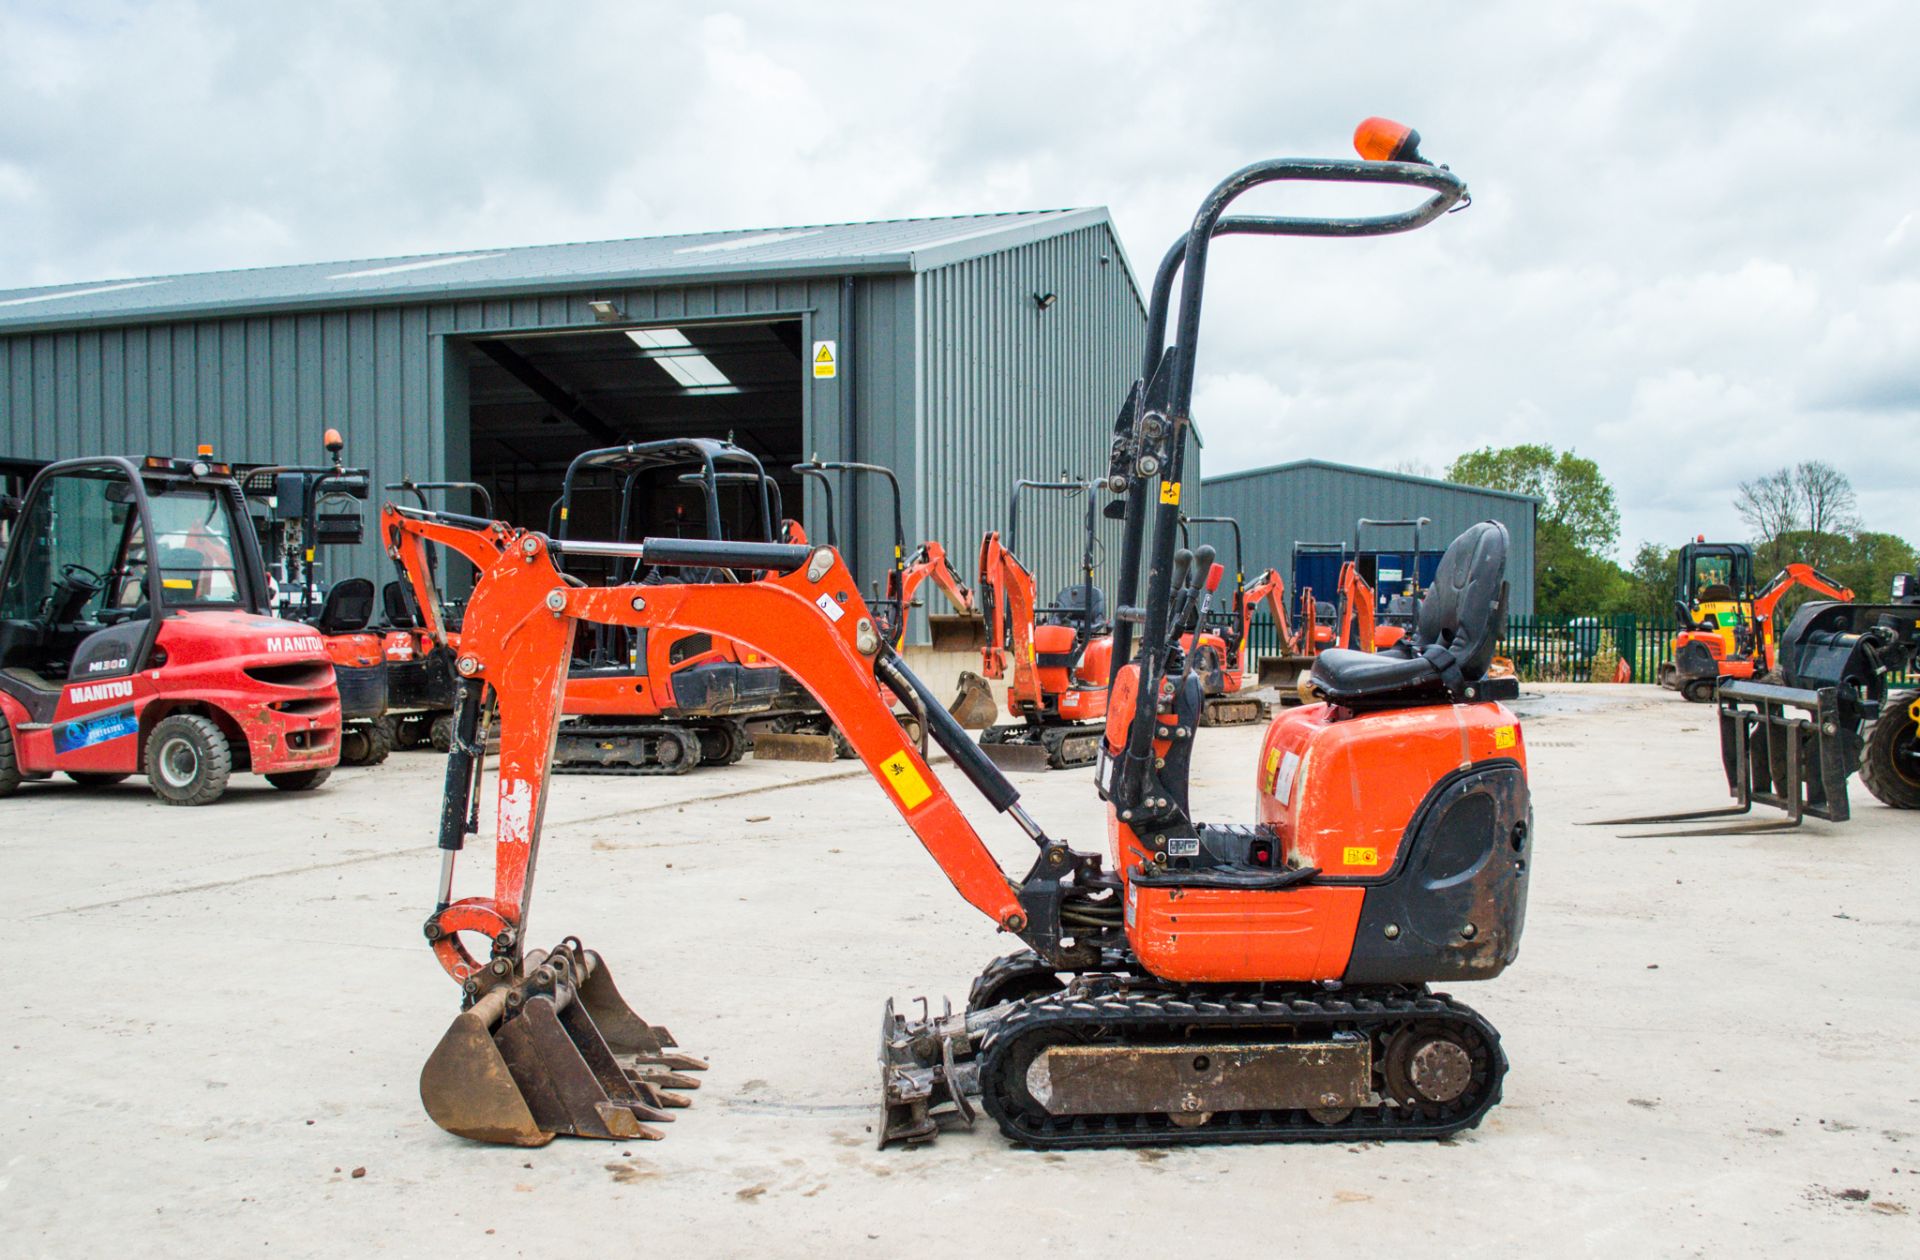 Kubota K008-3 0.8 tonne rubber tracked micro excavator Year: 2018 S/N: 30713 Recorded Hours: 1319 - Image 8 of 20